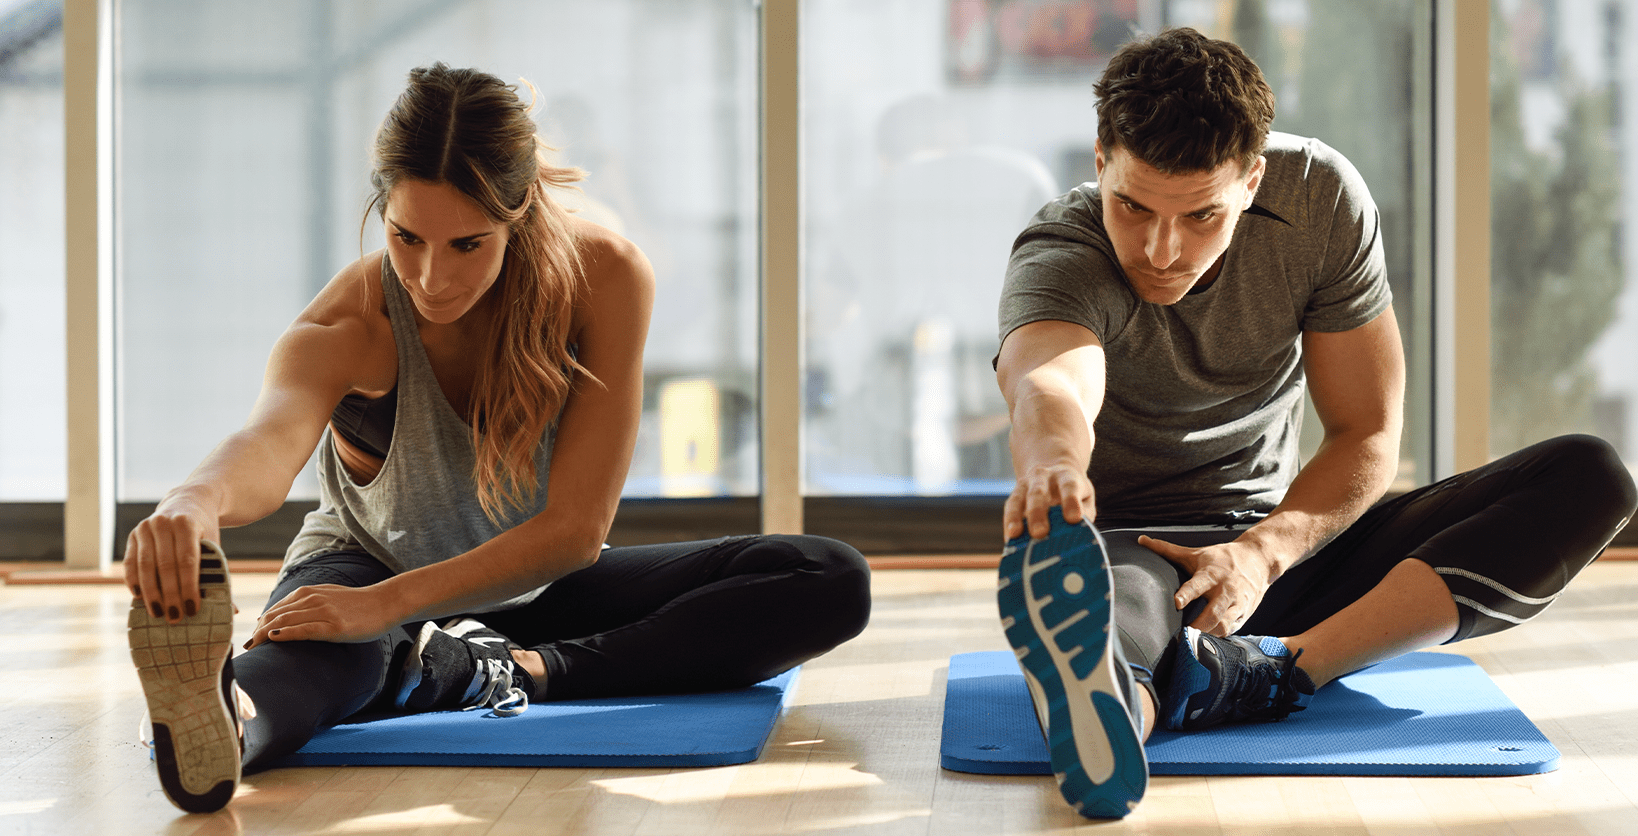  A young woman and a young man stretch their legs before exercising.